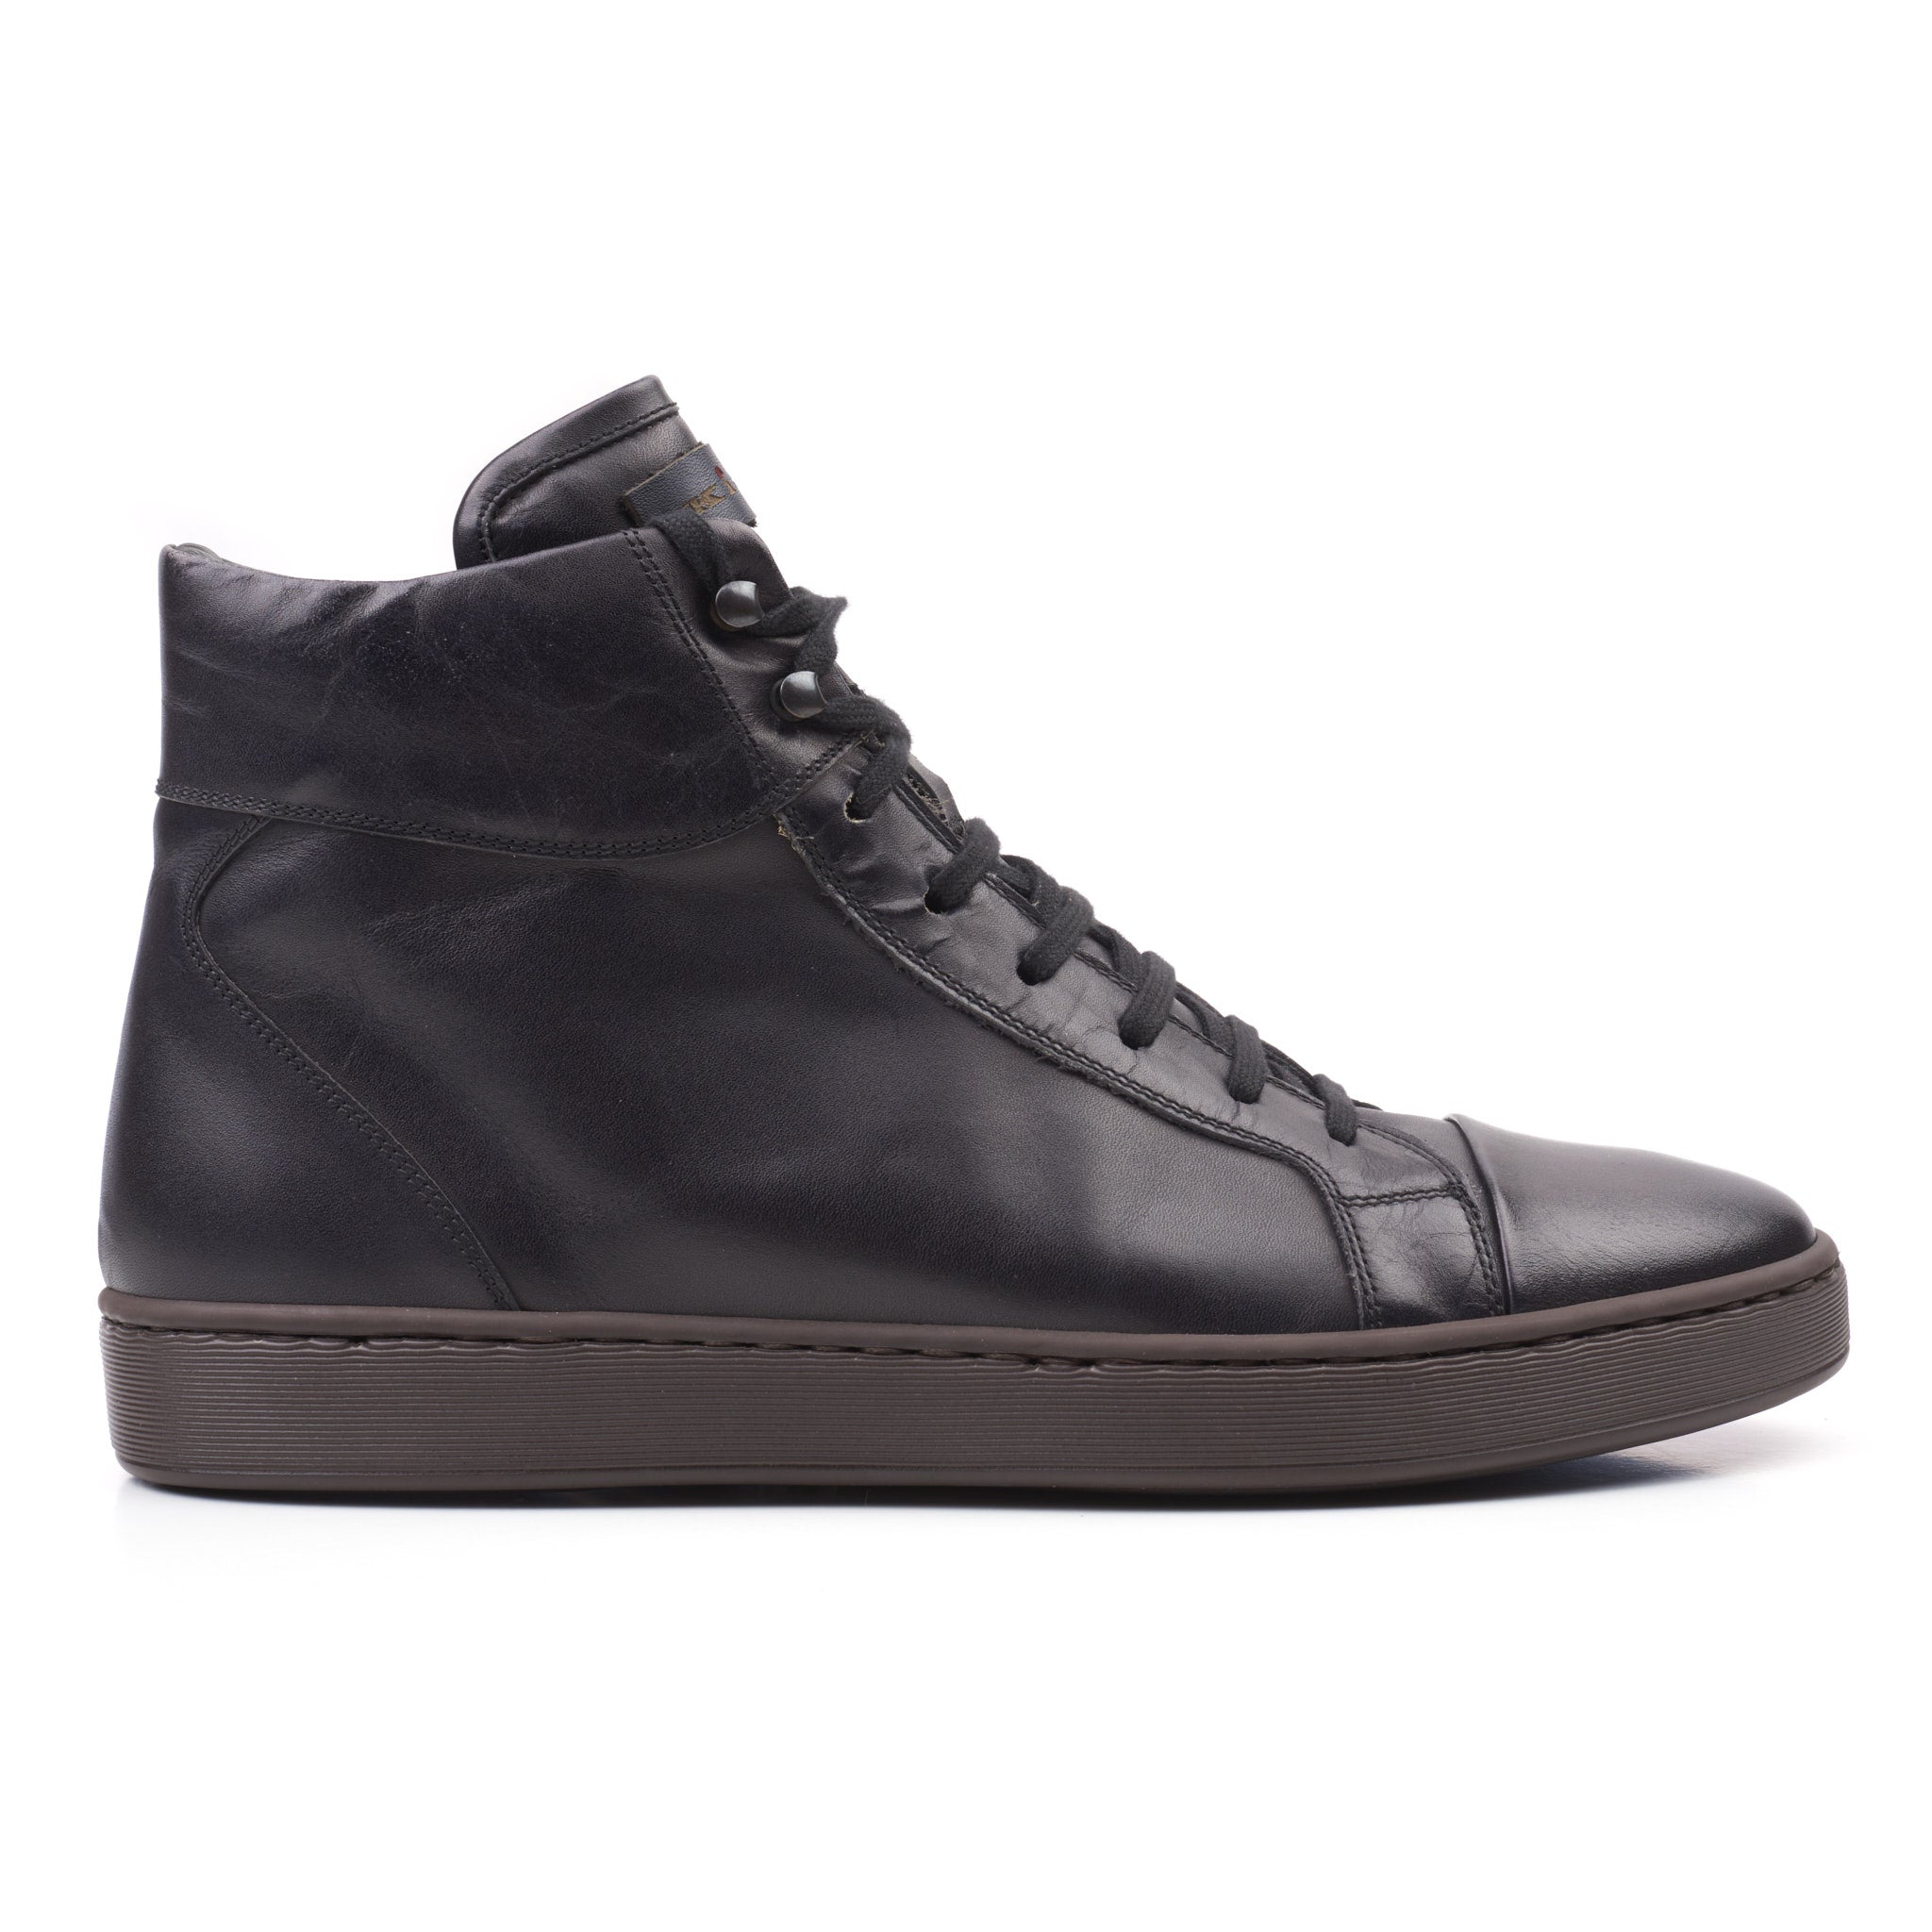 KITON Black Calfskin Leather High-Top Sneaker Boots Shoes NEW with Box KITON